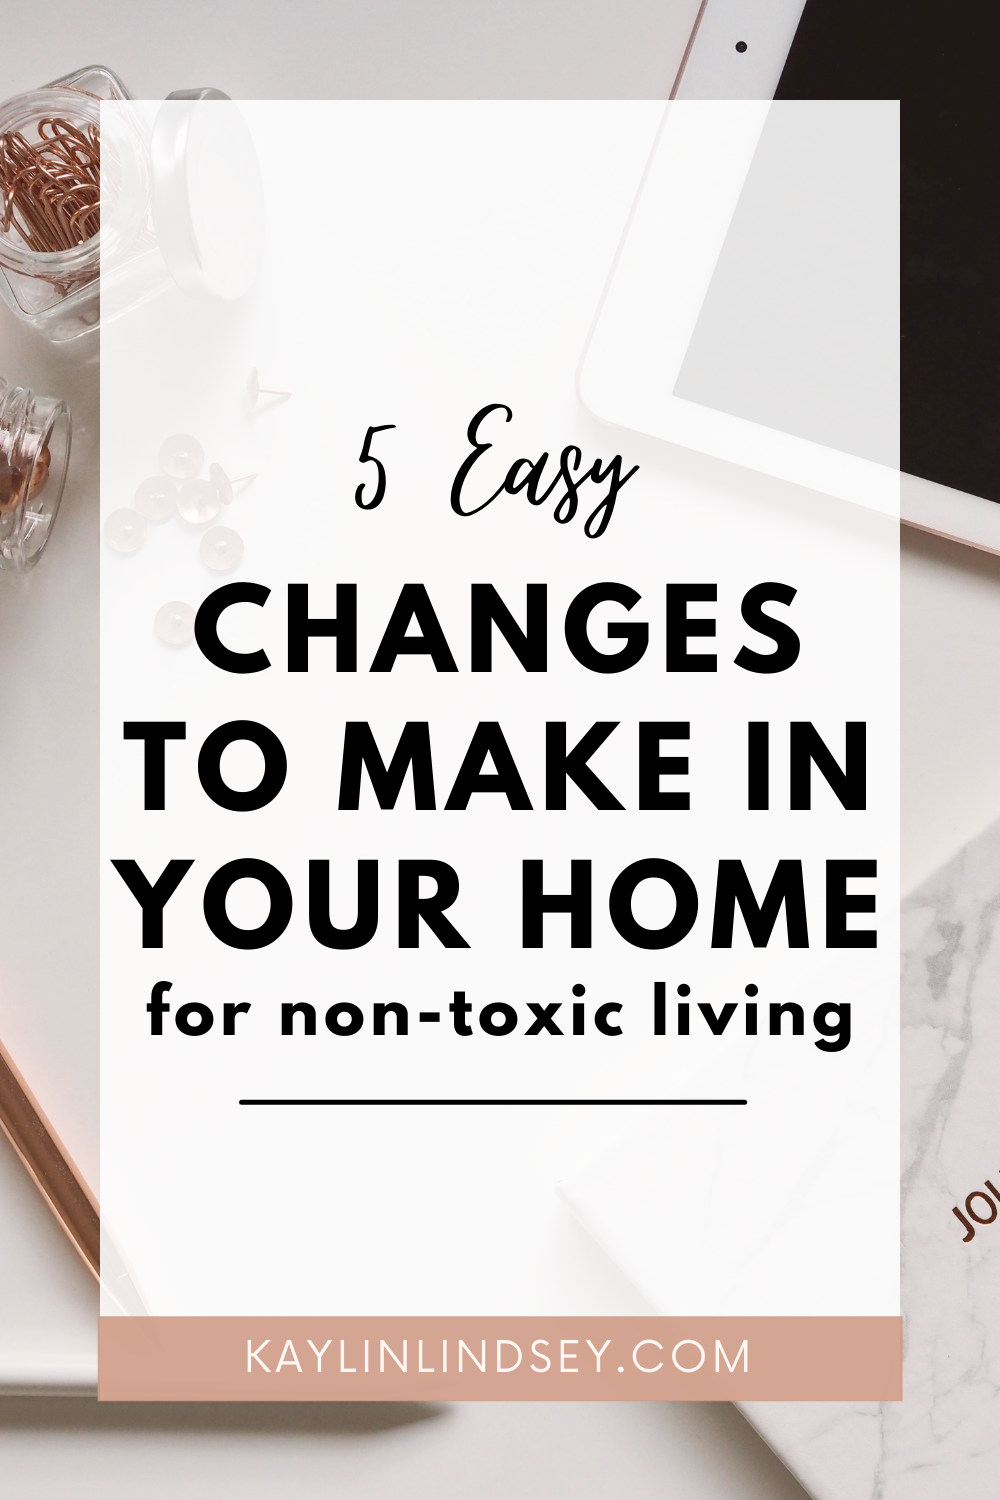 5 easy changes in your home for non-toxic living